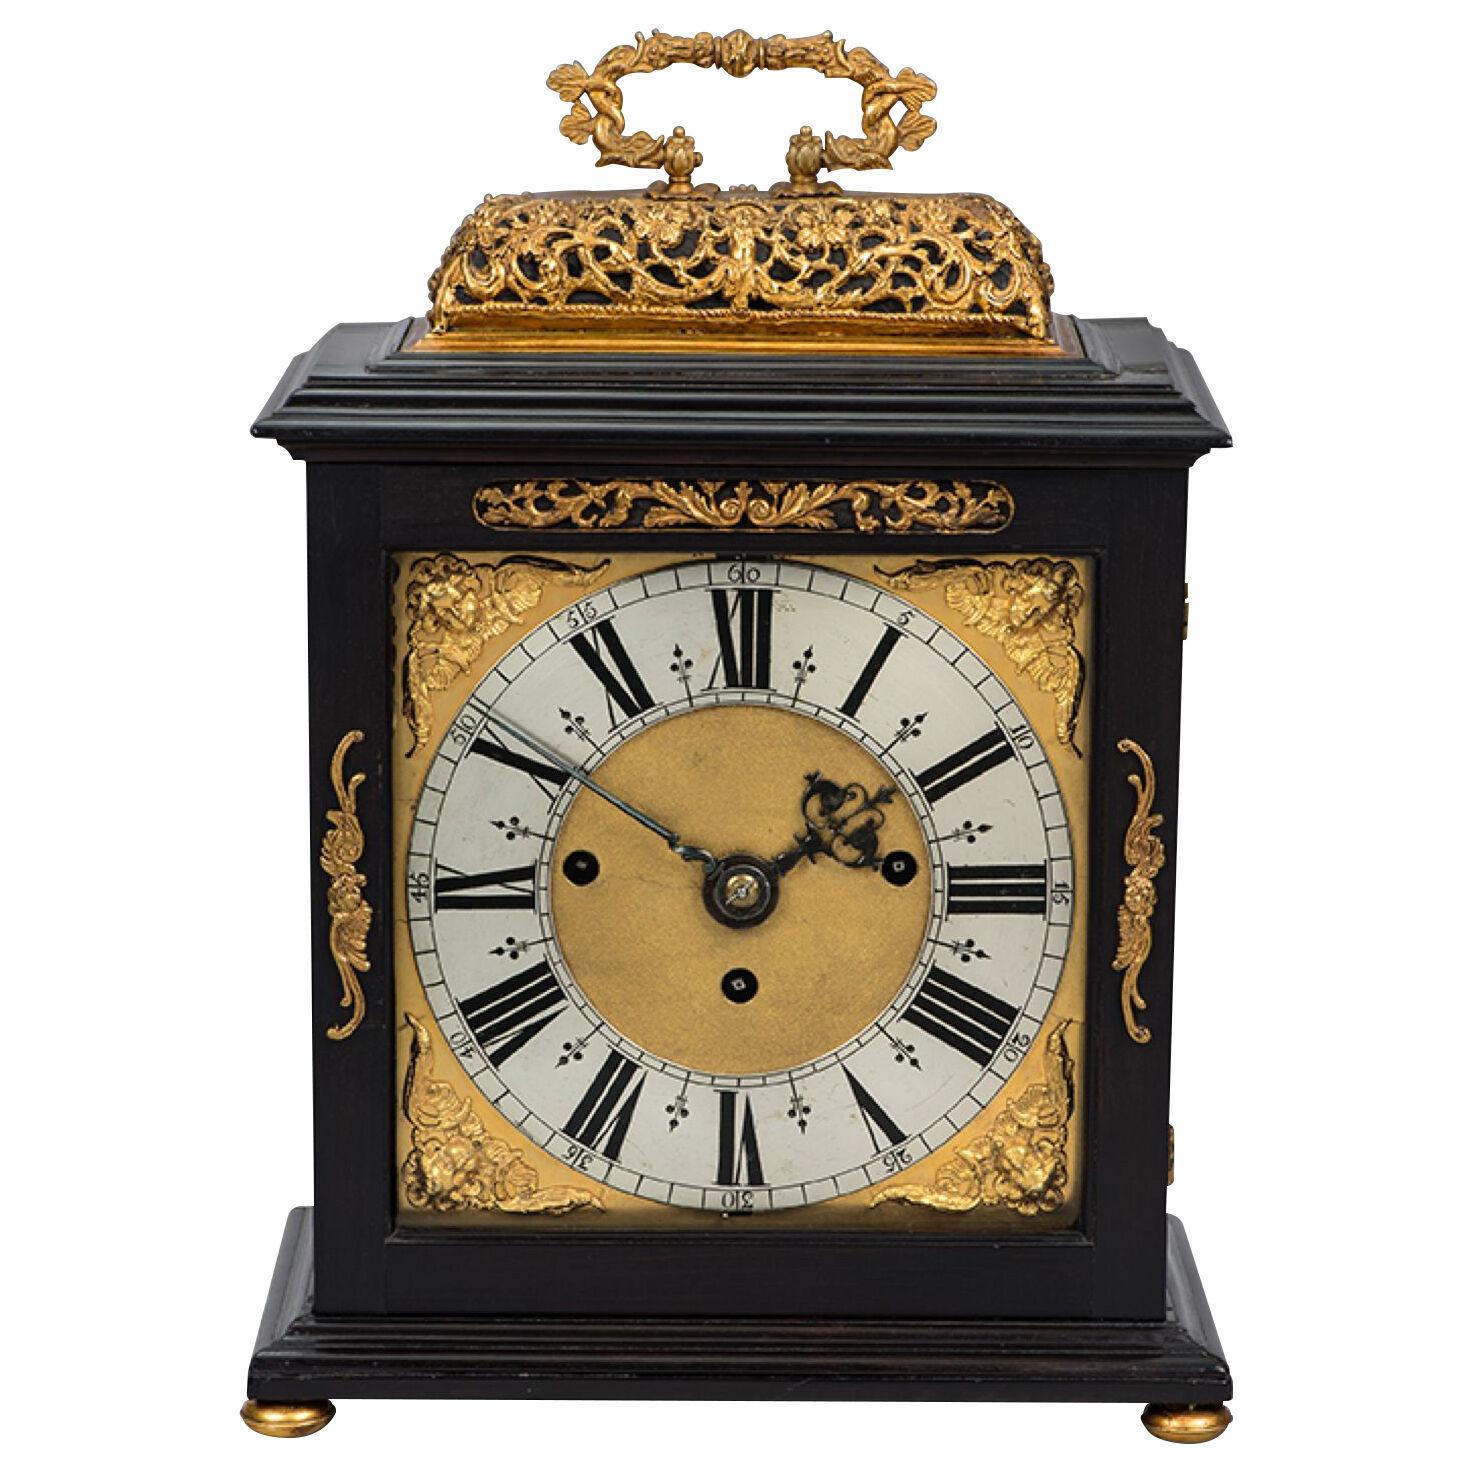 17TH CENTURY ANTIQUE EBONY AND GILT TABLE CLOCK BY EDWARD BURGIS OF LONDON